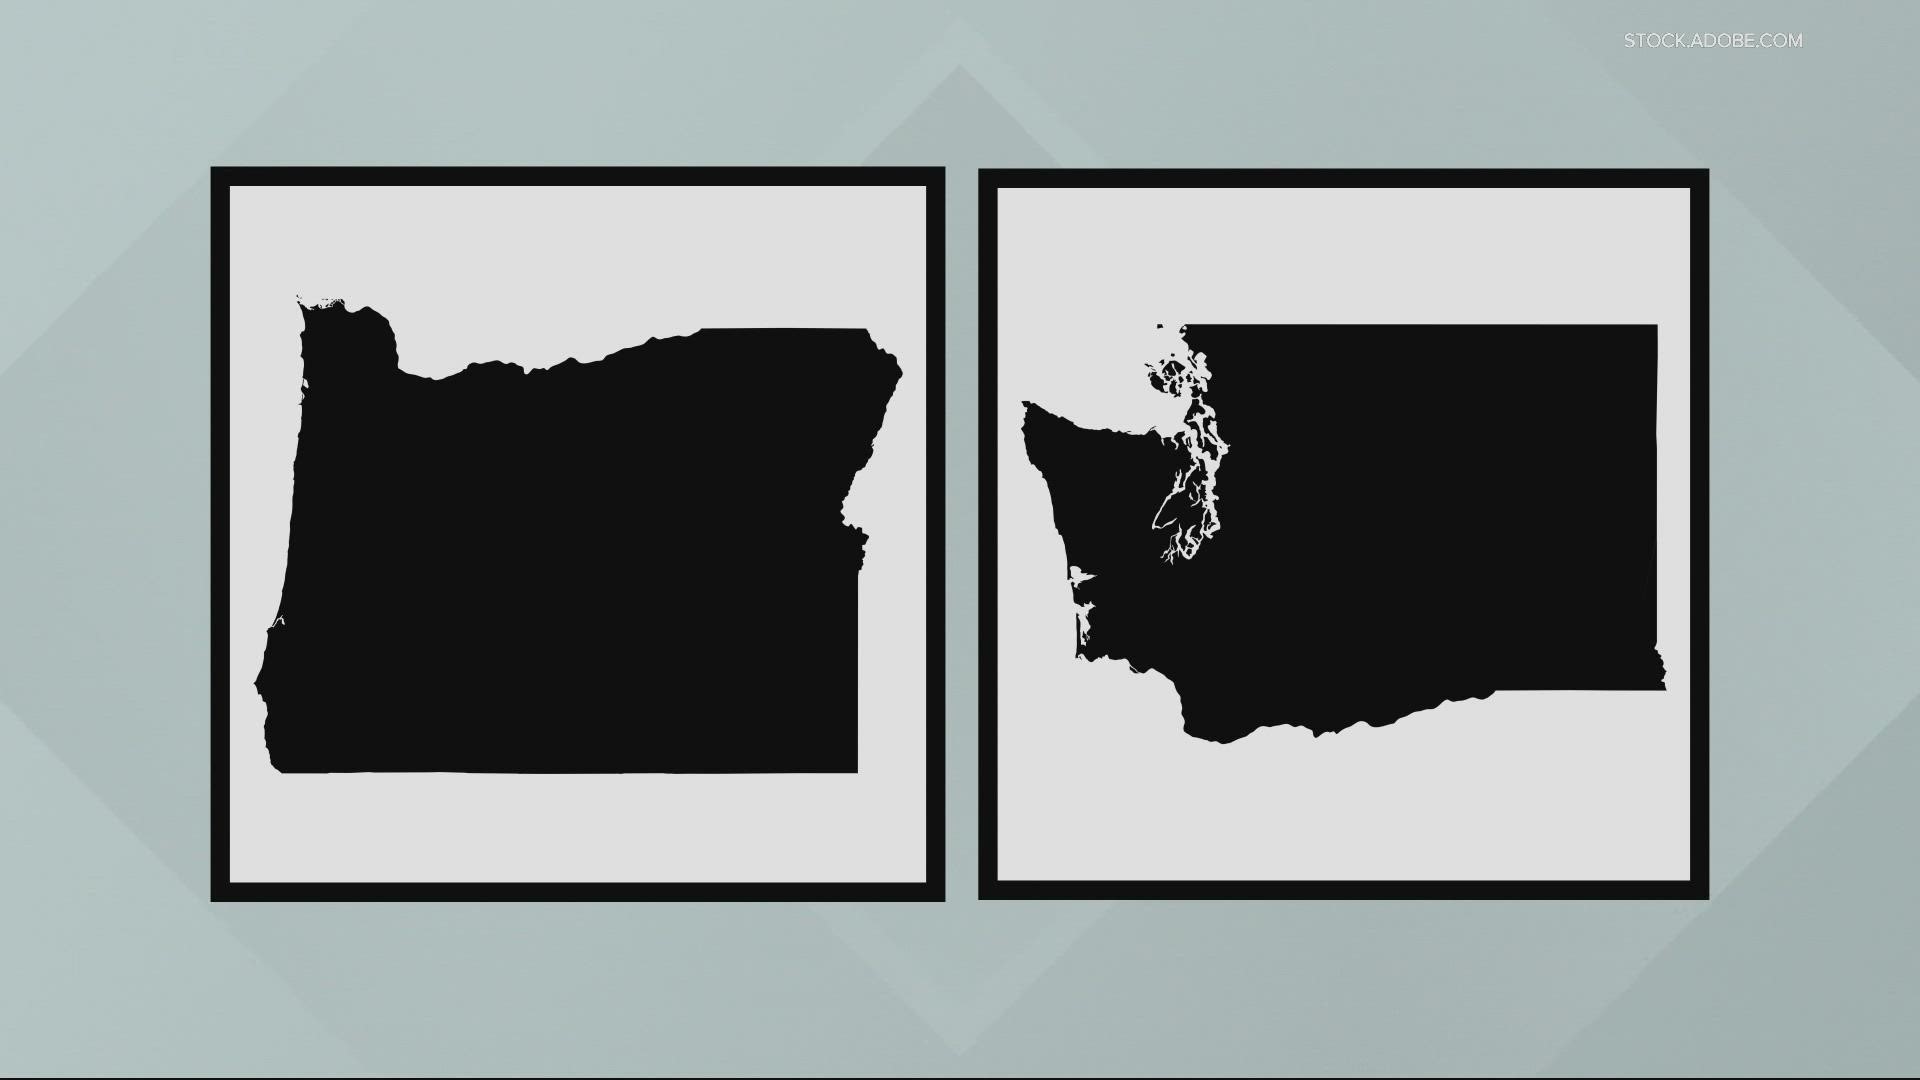 Contact tracing is still happening, but health departments in Oregon and Washington view its importance differently. KGW's Alma McCarty reports.